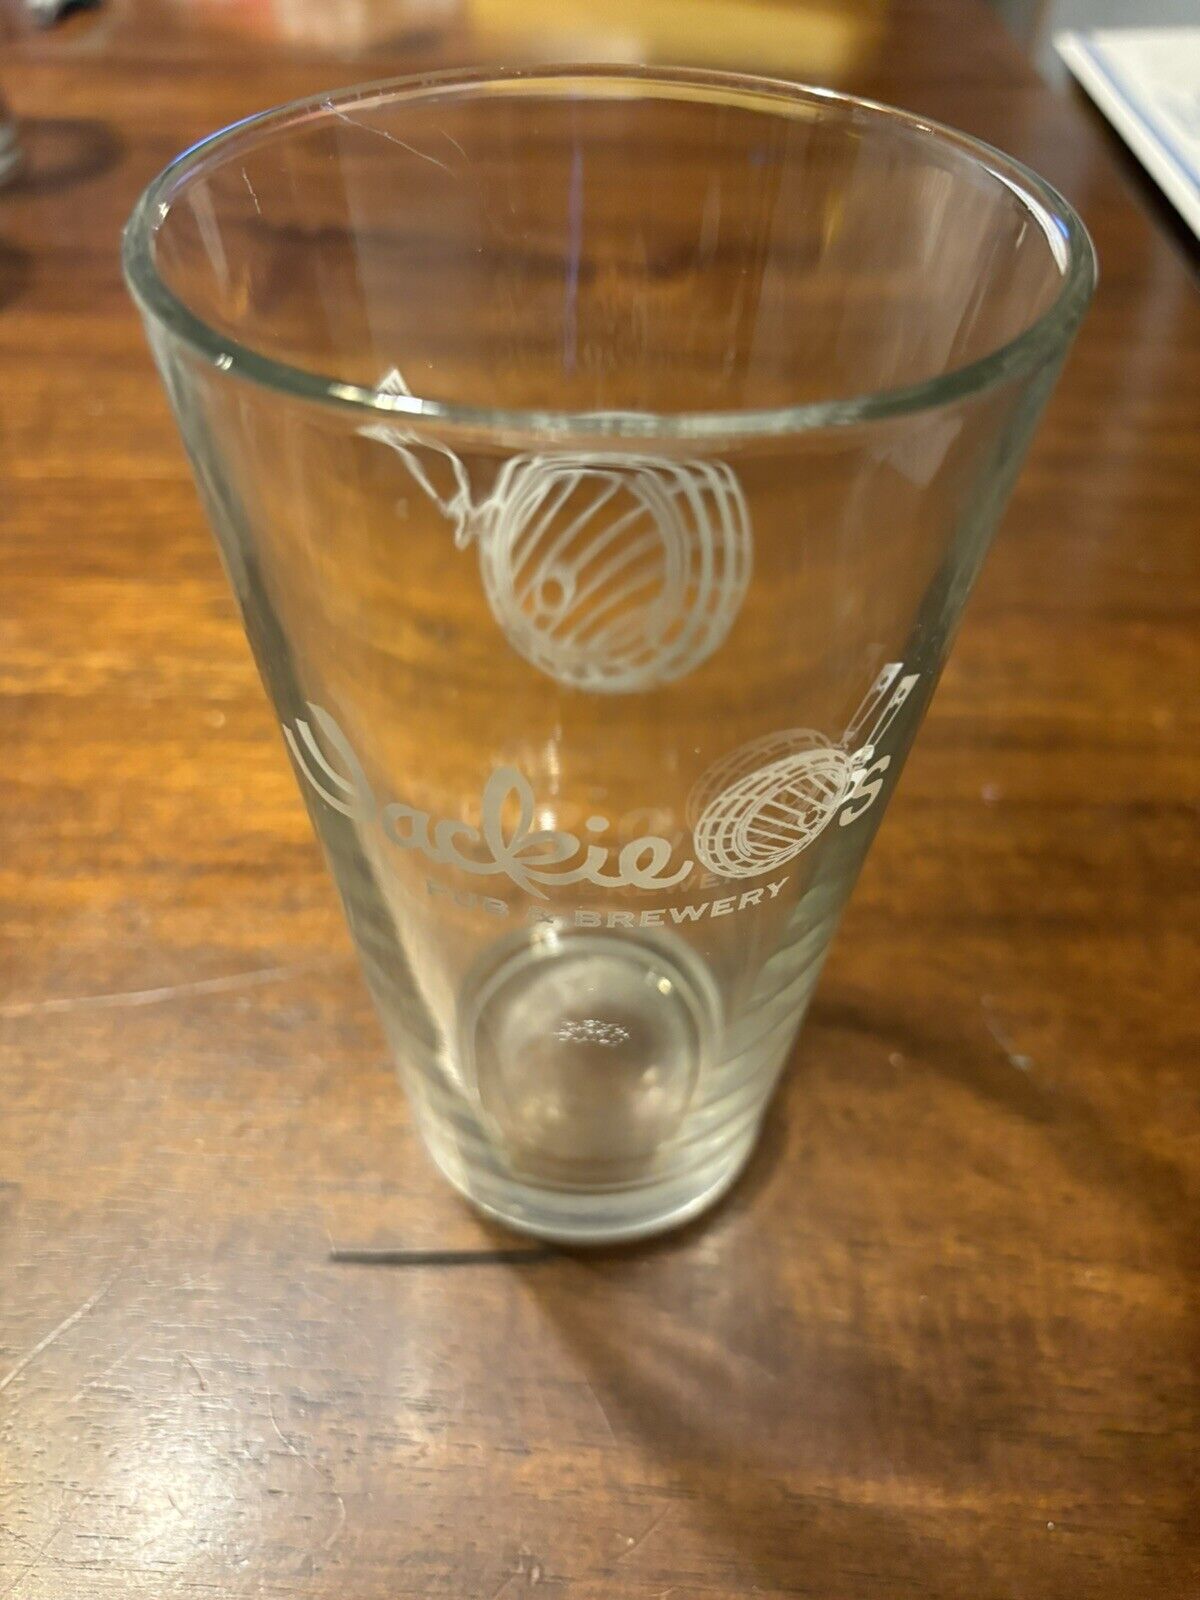 JACKIE O’S BREWING COMPANY BEER PINT GLASS ATHENS OHIO